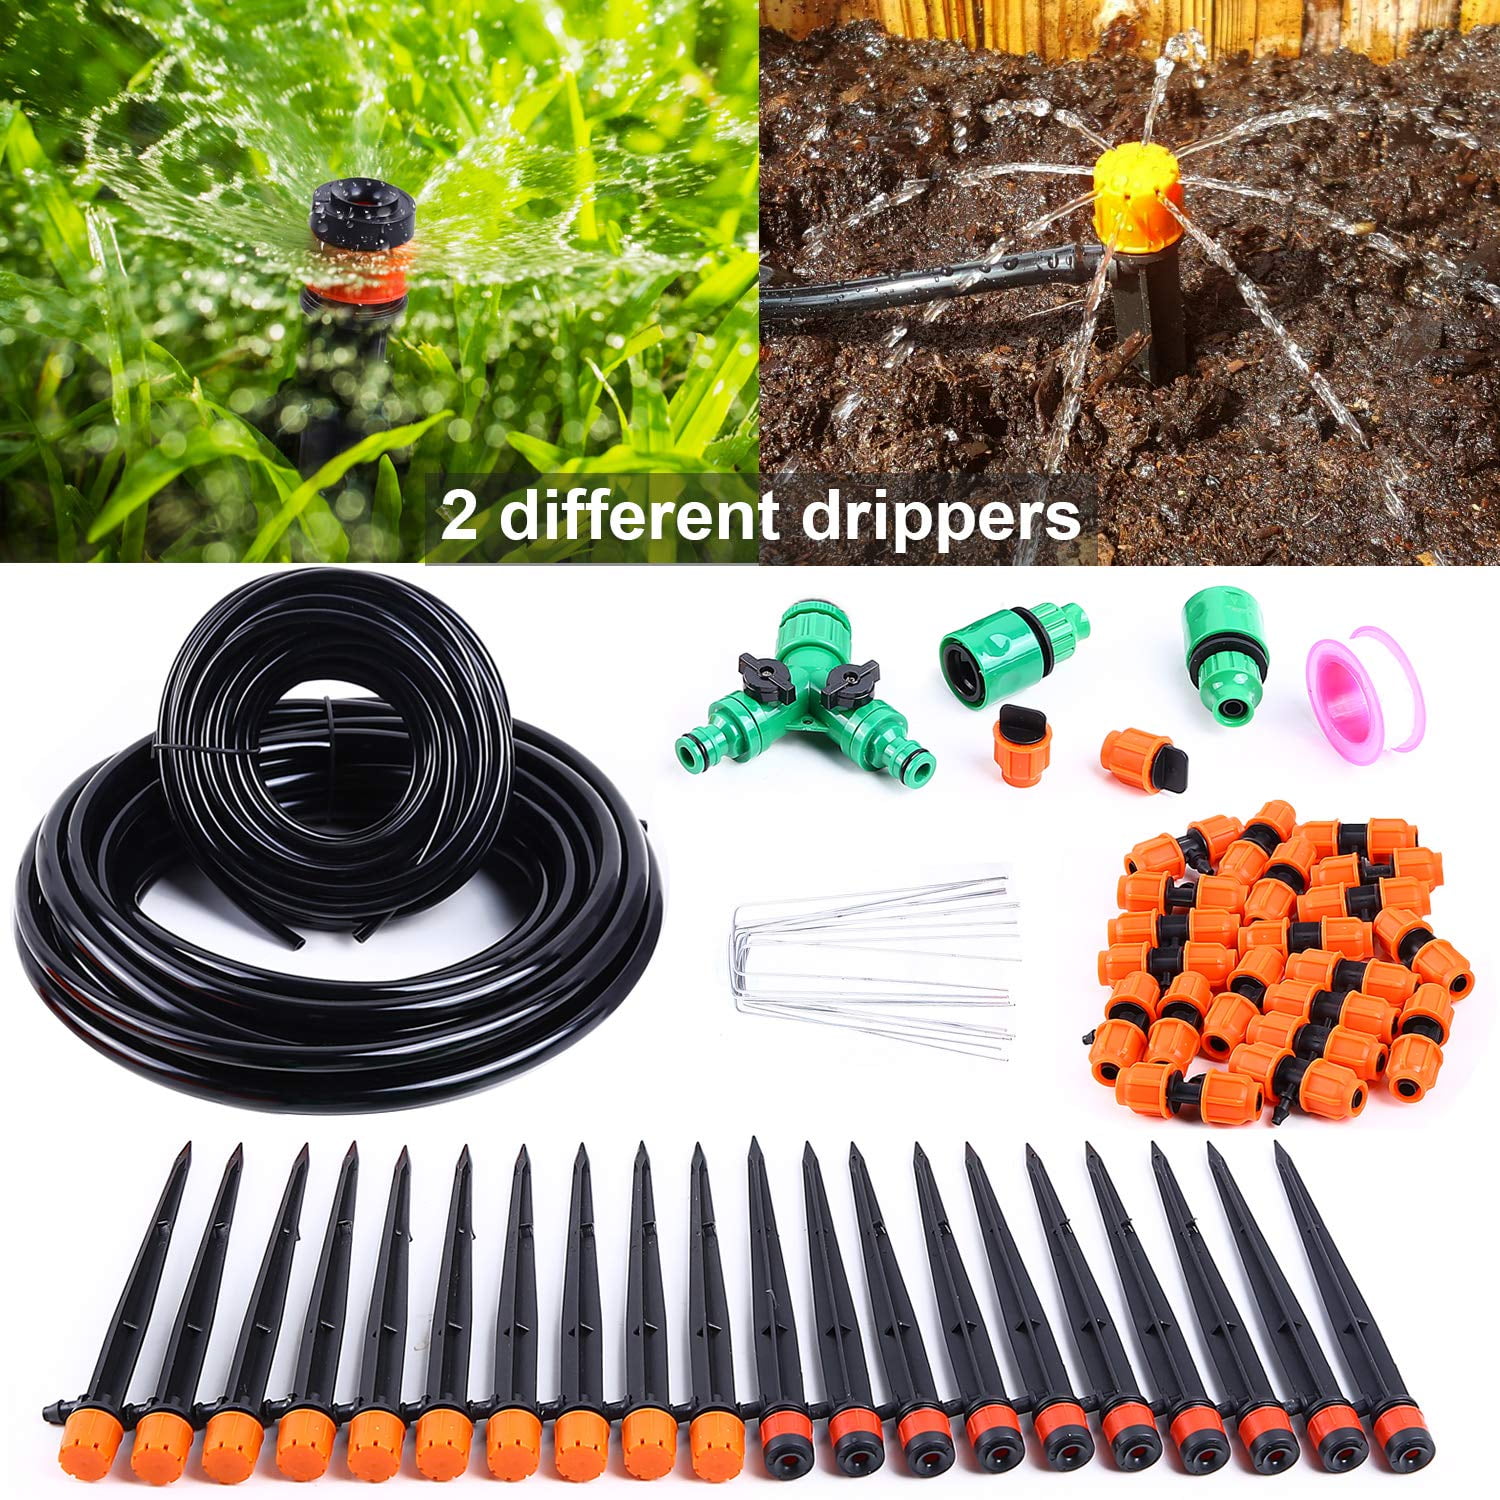 Garden Micro Drip Irrigation System Automatic Watering Sprinkler Drippers Kit 